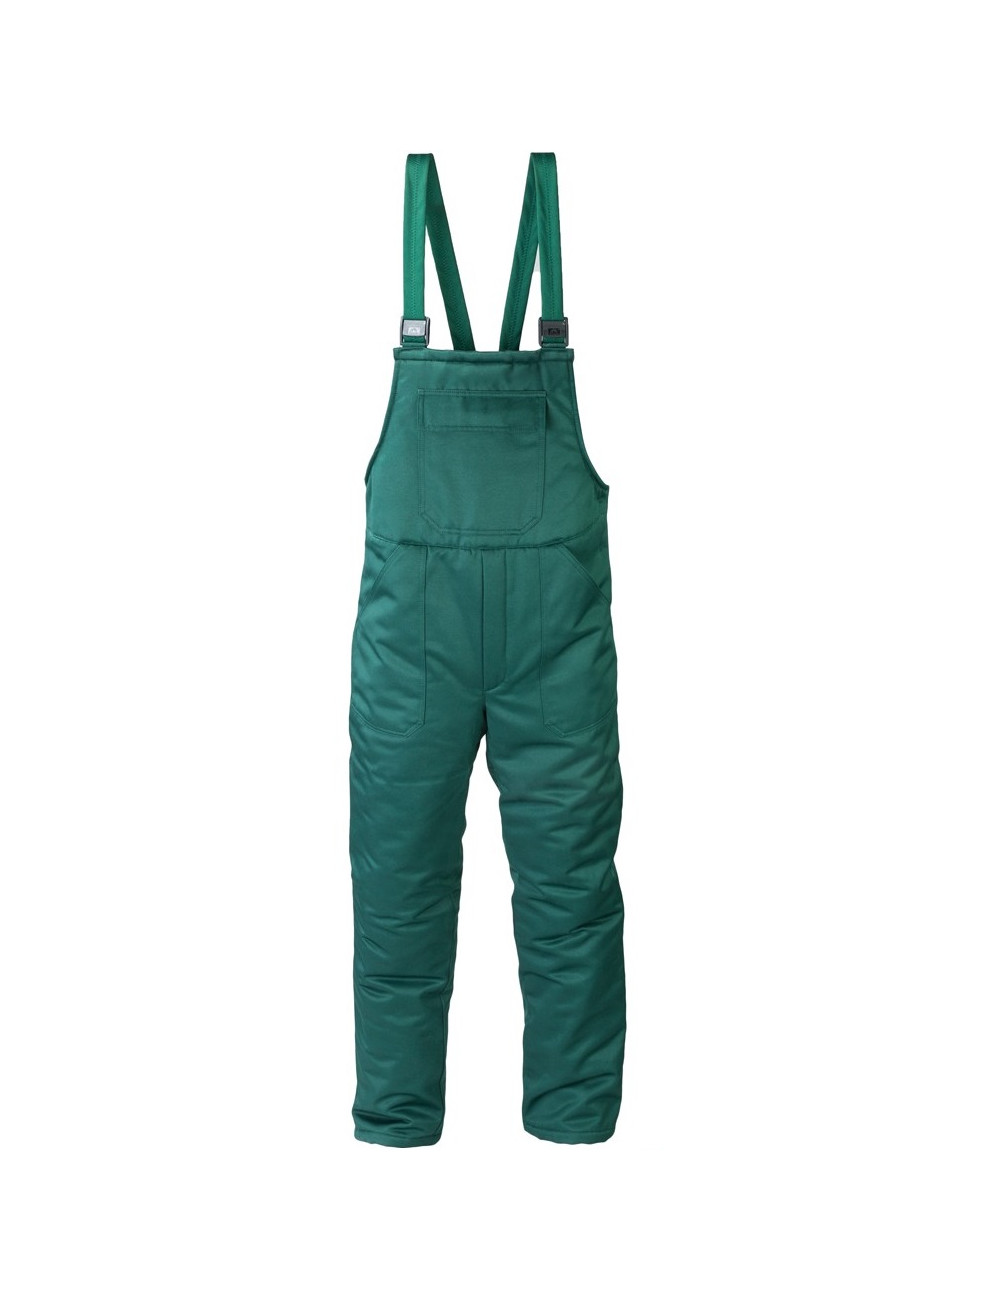 Insulated dungarees designed for work in low temperatures.